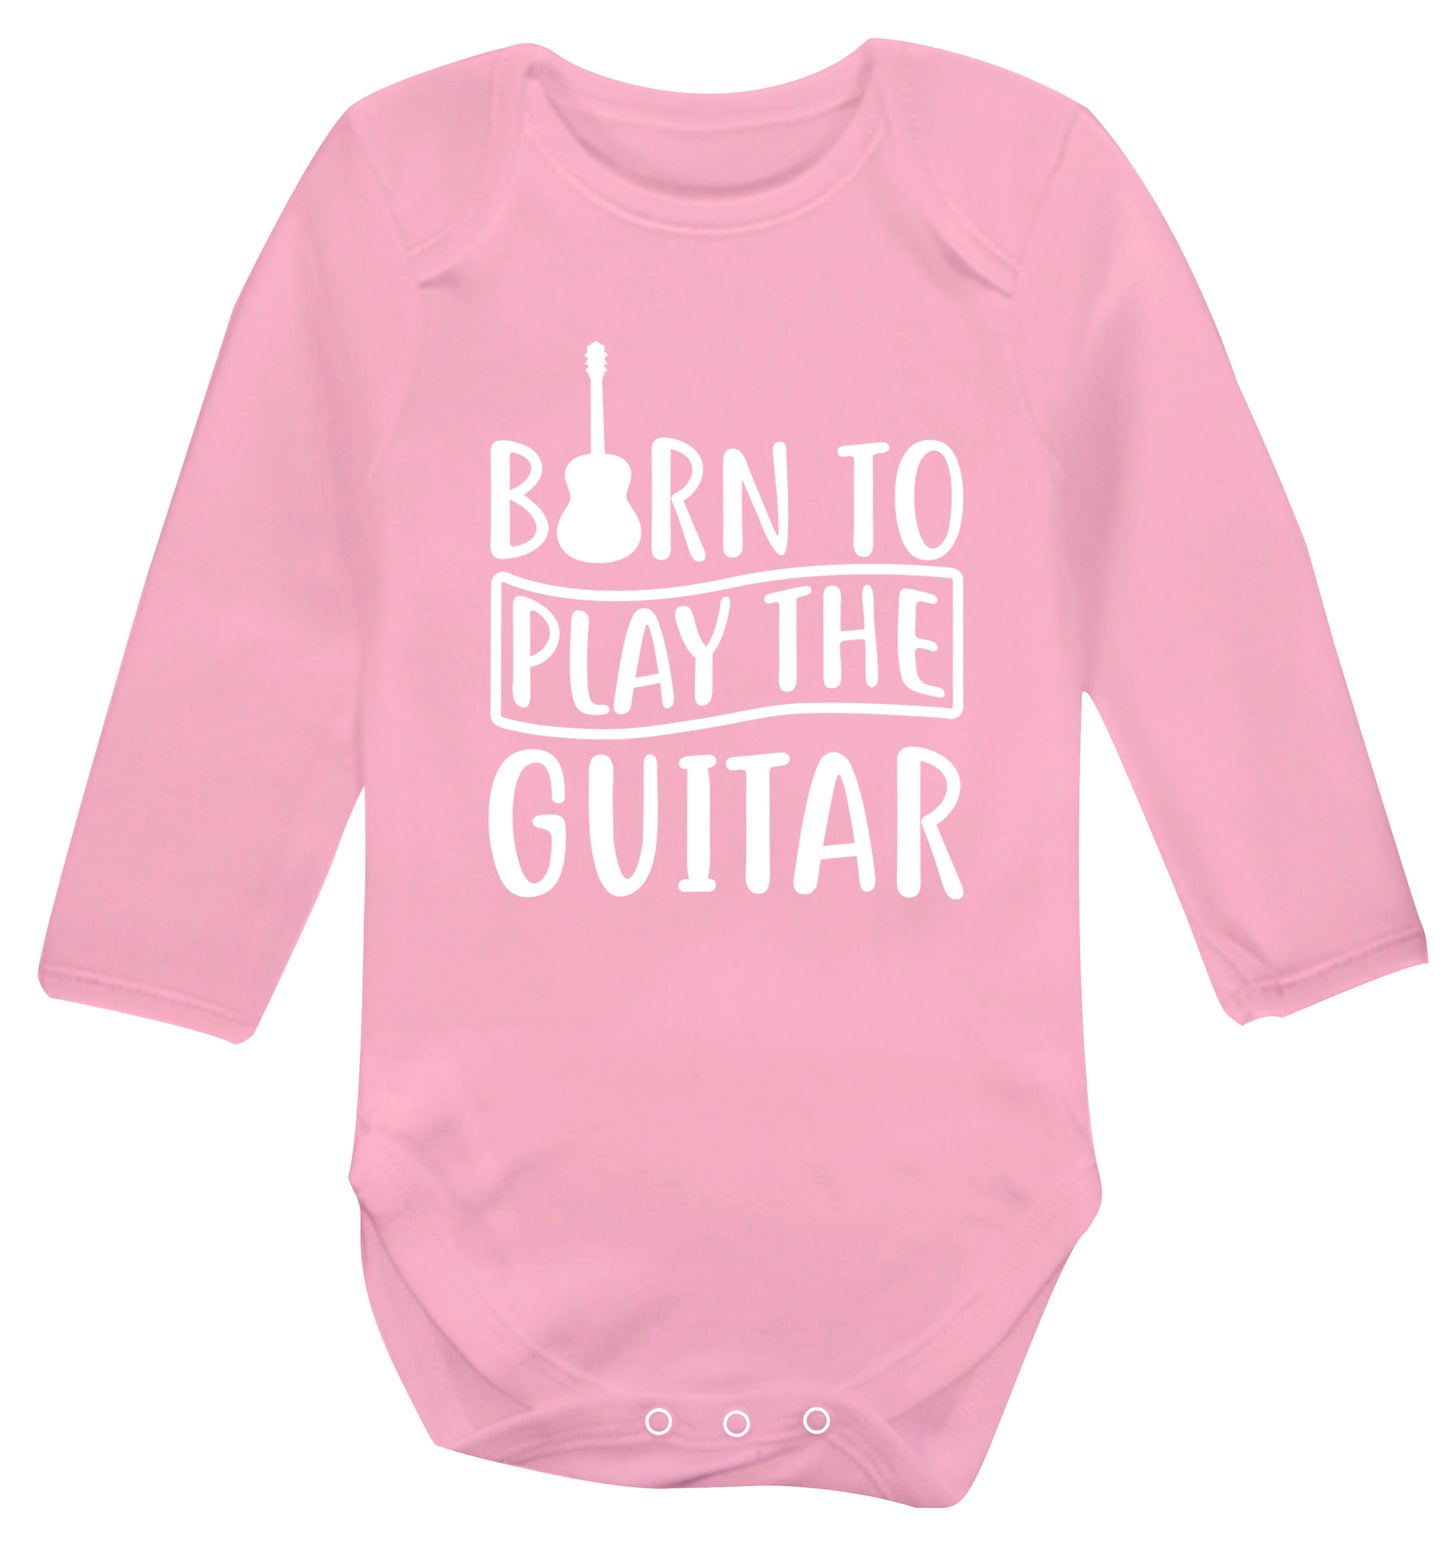 Born to play the guitar Baby Vest long sleeved pale pink 6-12 months